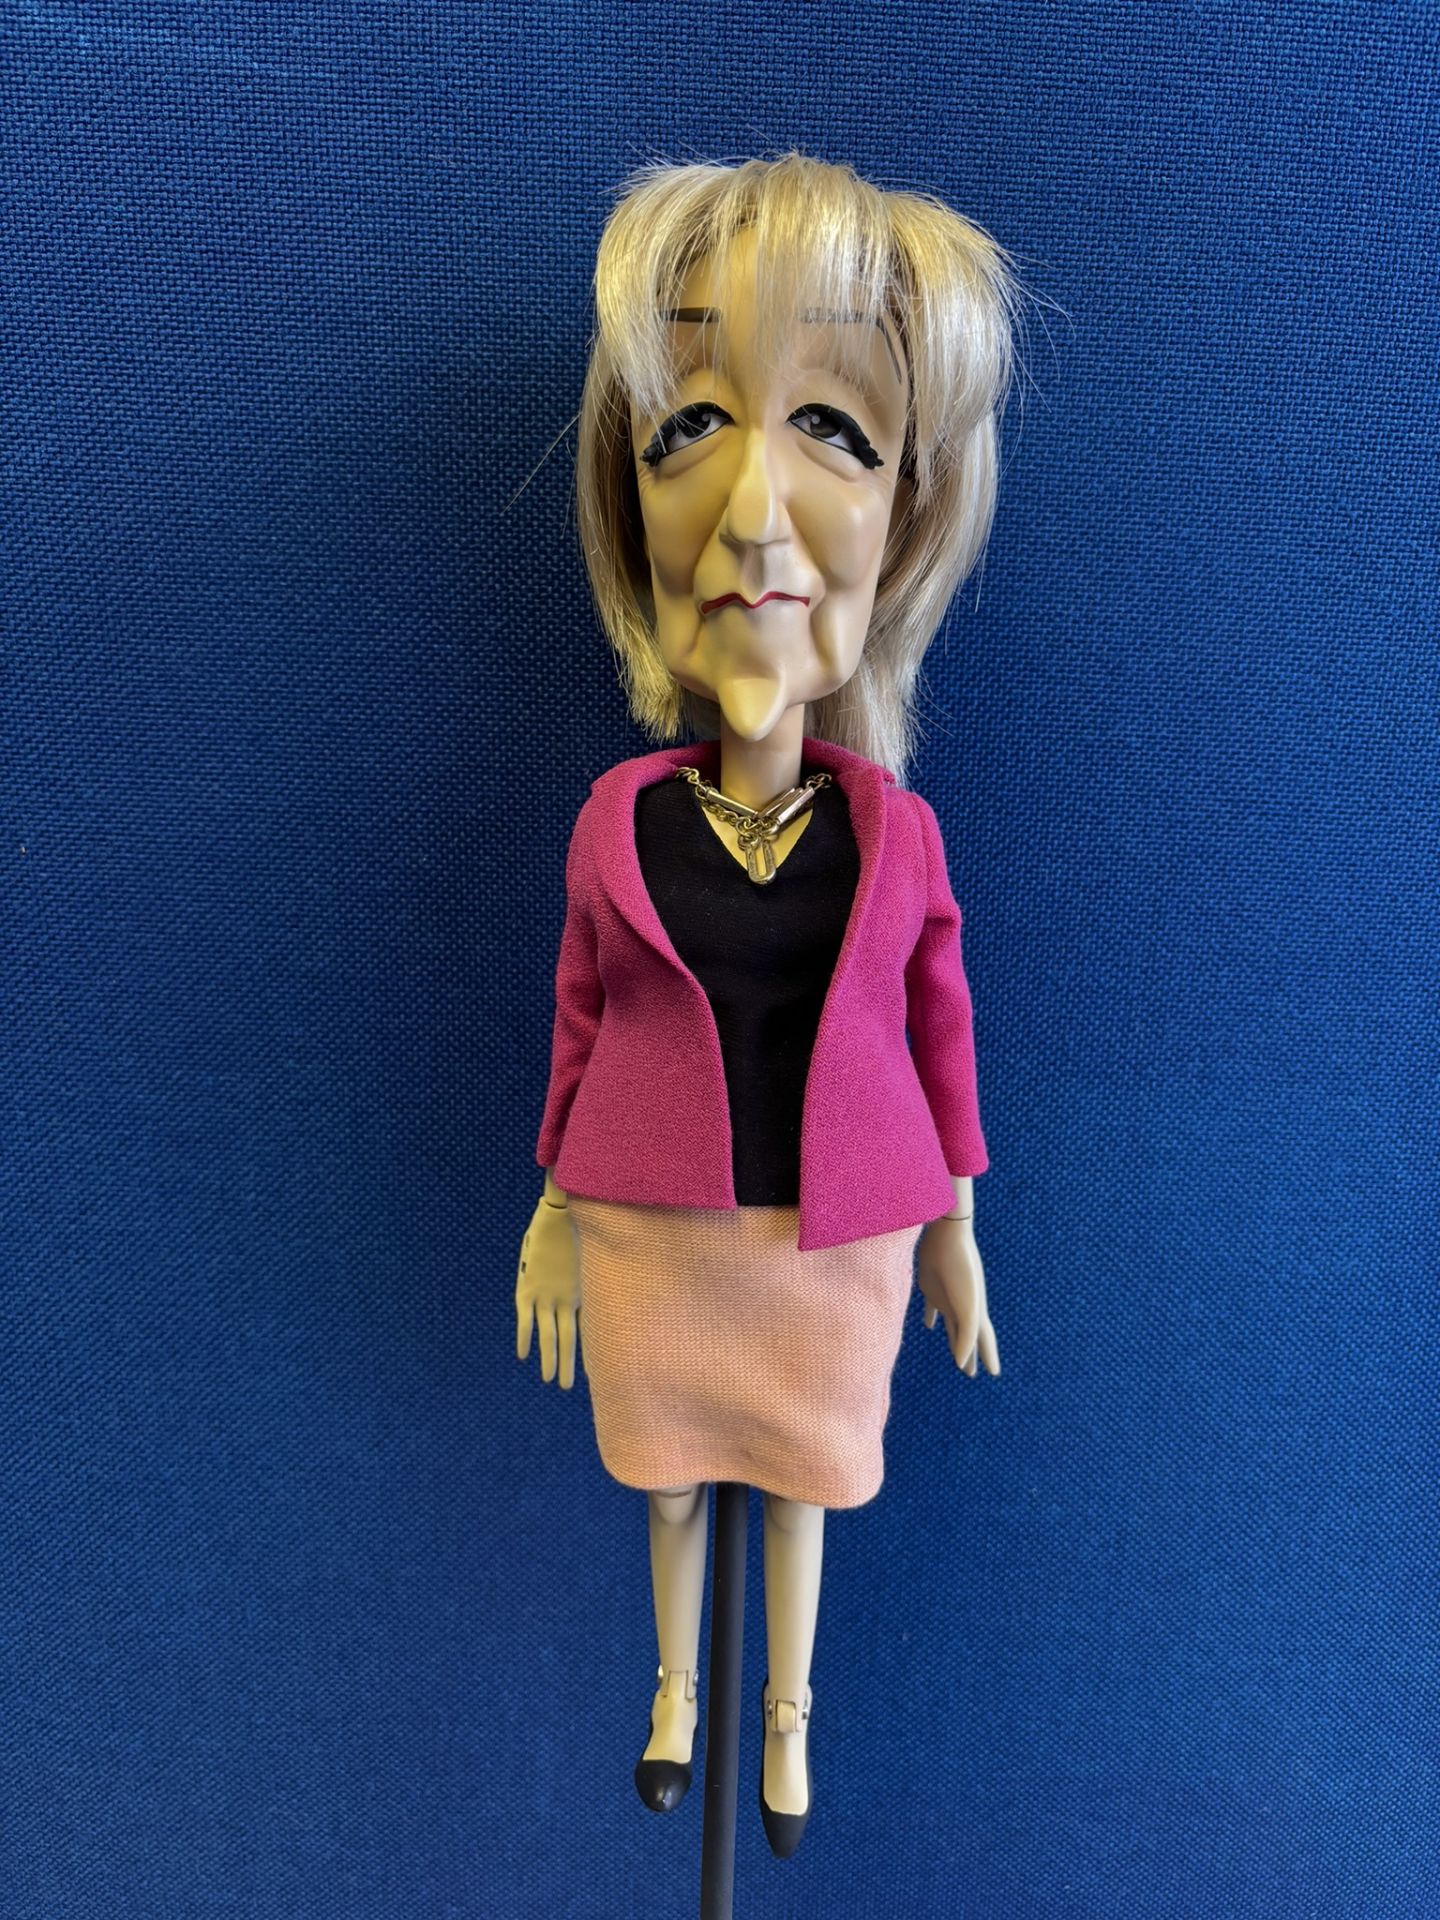 Newzoid puppet - Andrea Leadsom - Image 2 of 3